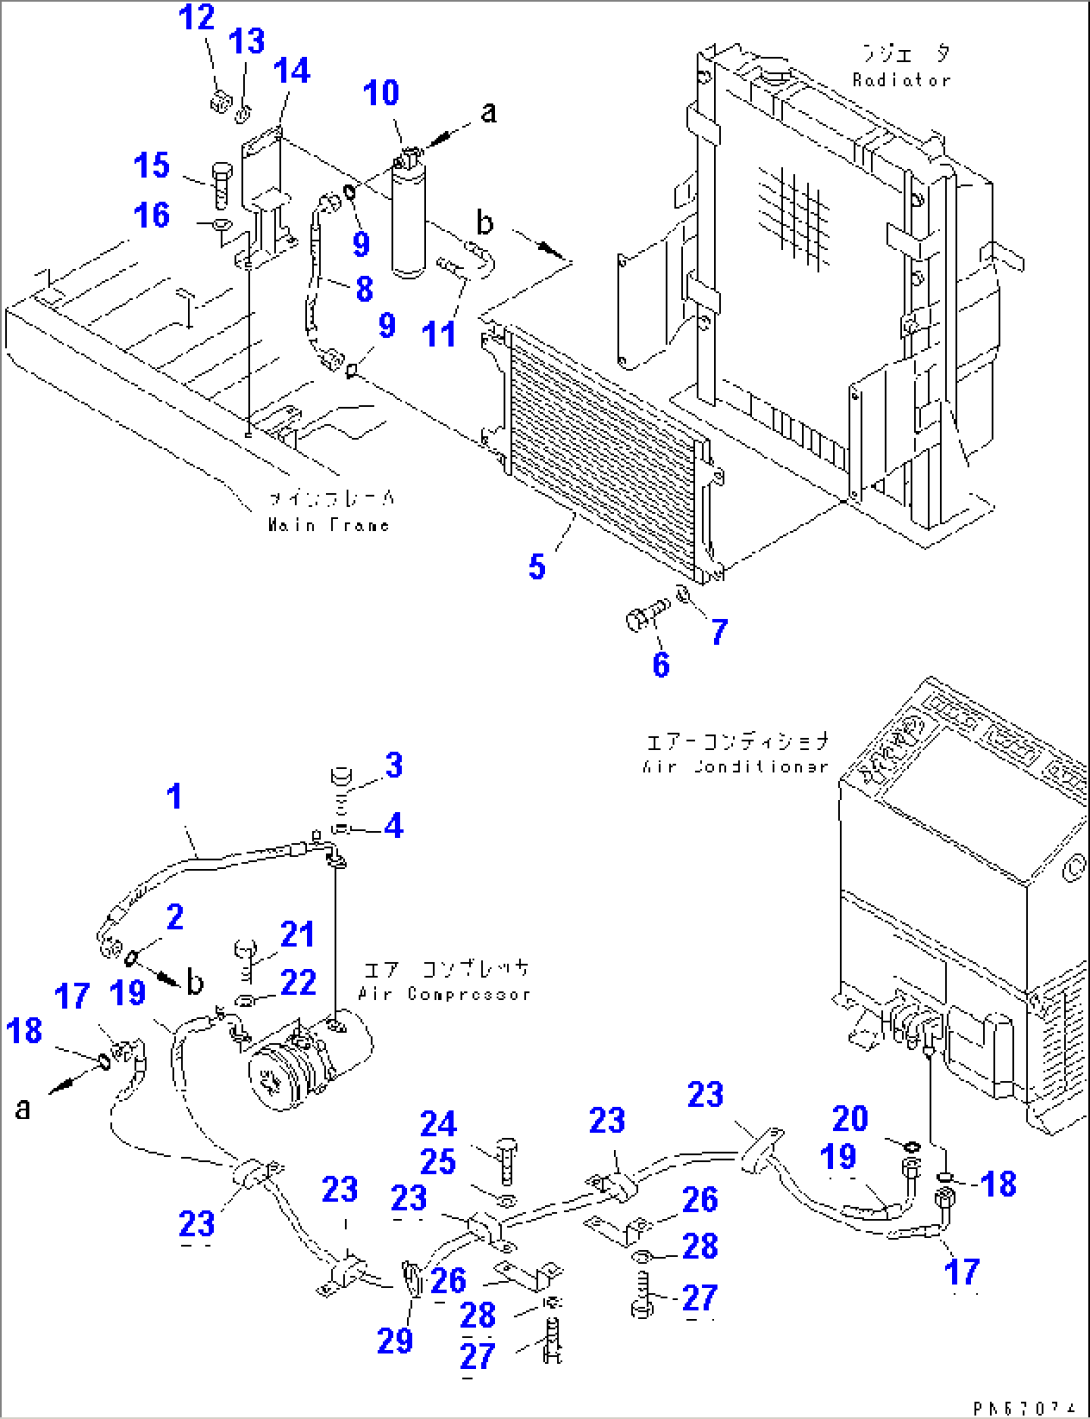 AIR CONDITIONER (4/5) (COOLER PIPING)